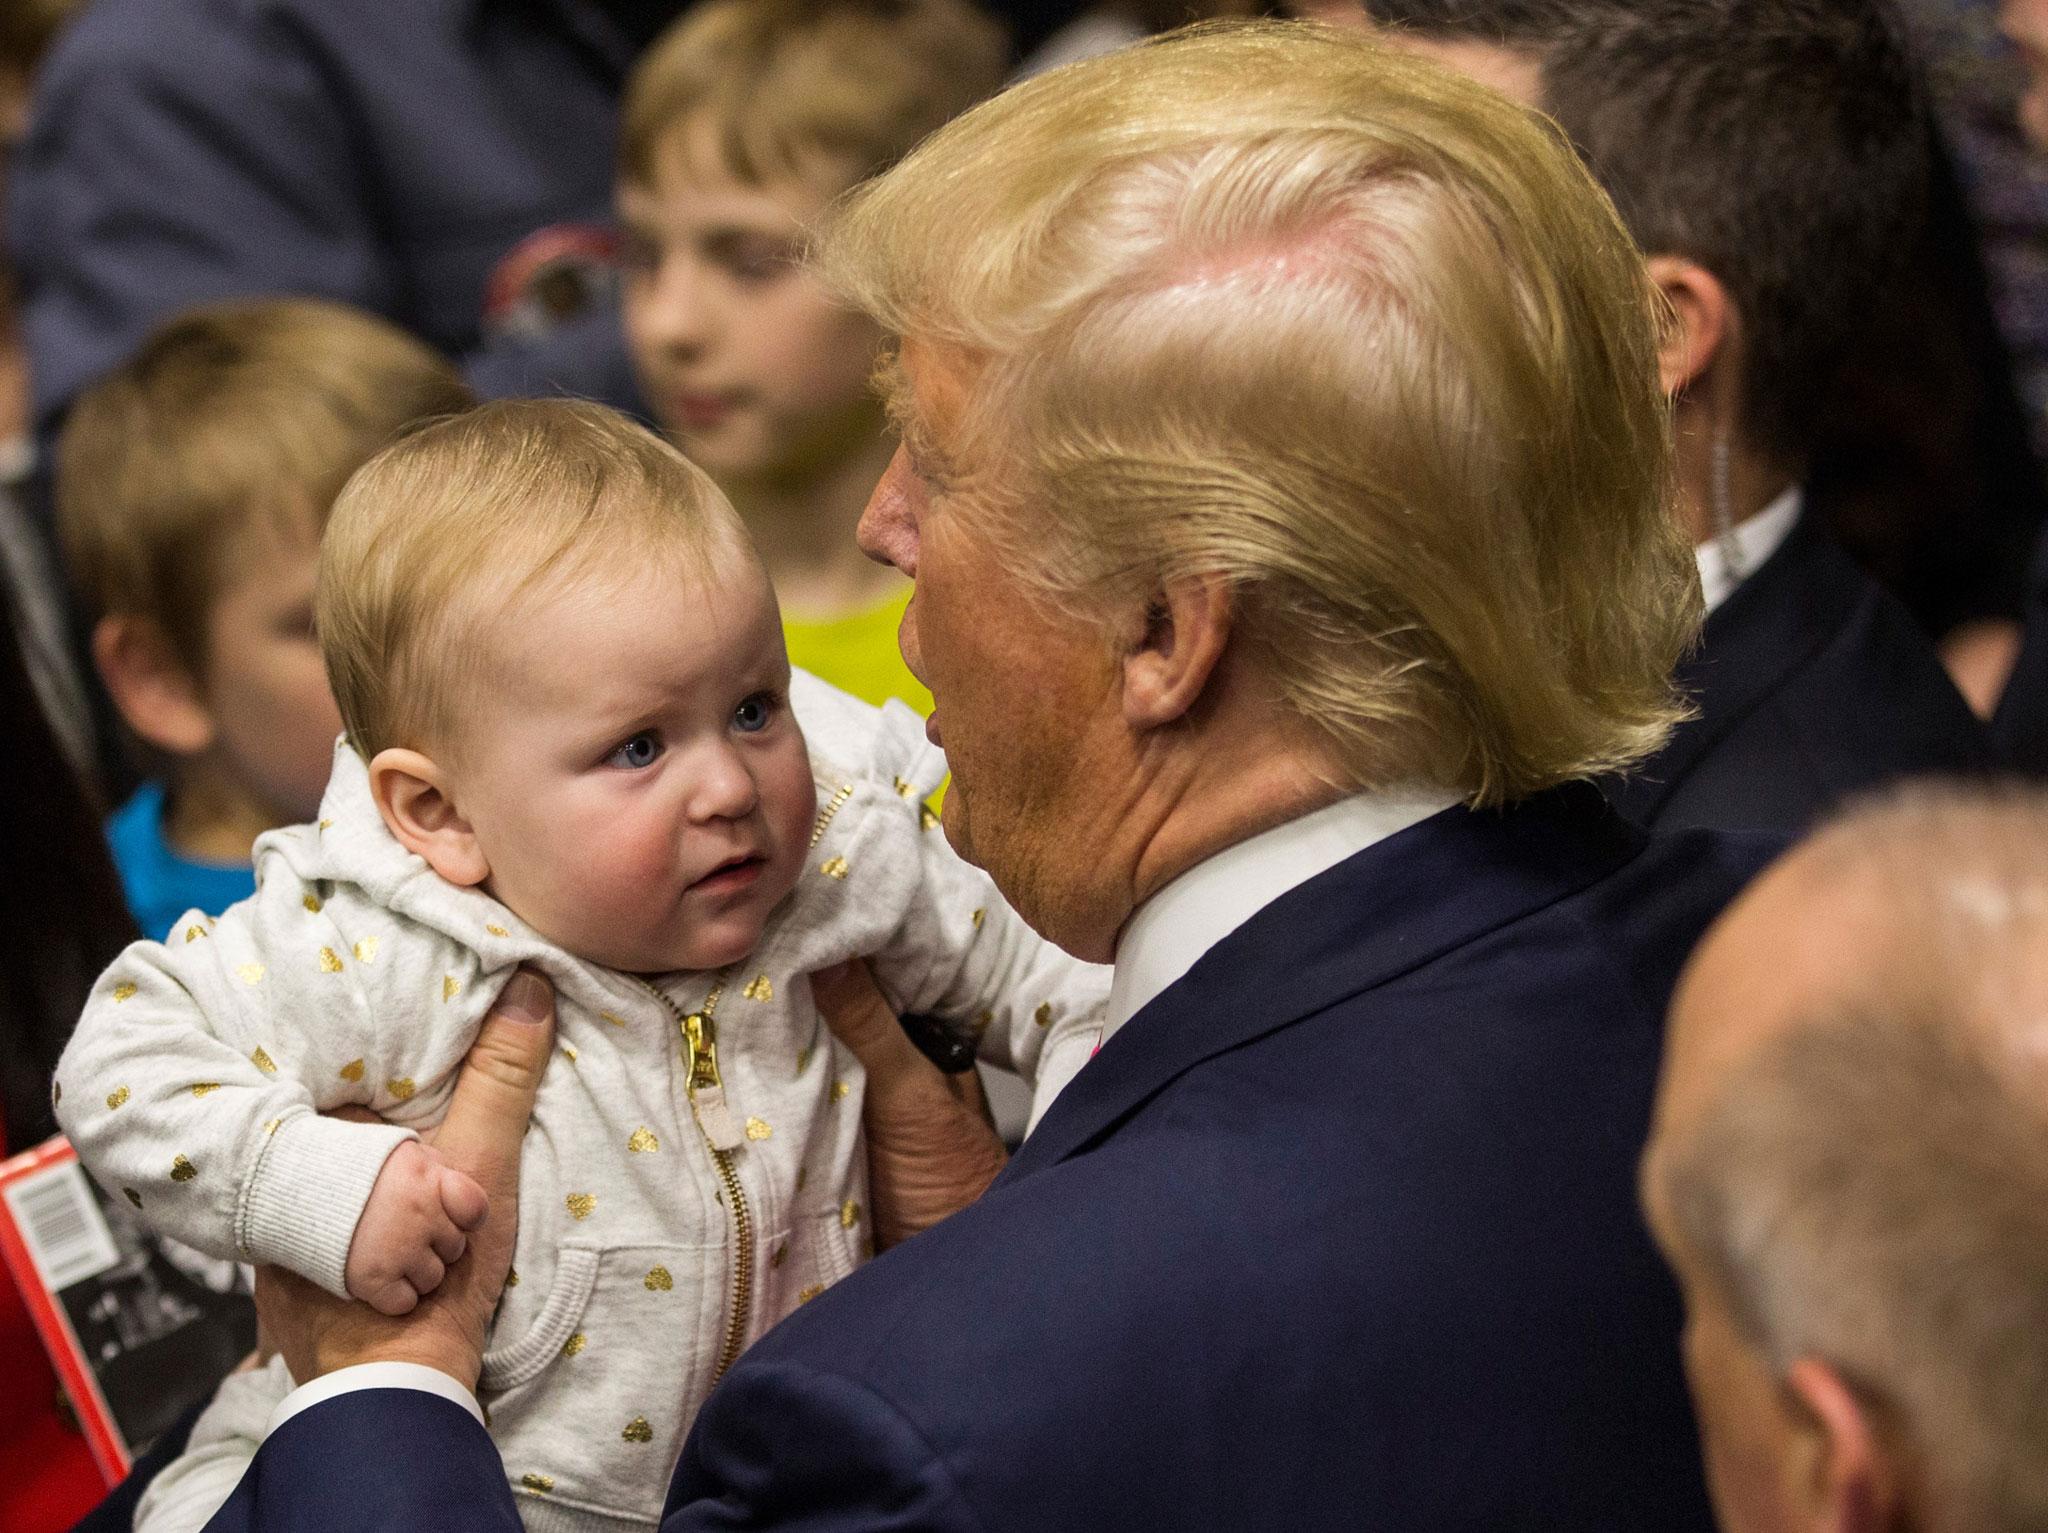 Donald Trump Vs Crying Baby Transcript Of The Bizarre Exchange In Full The Independent The Independent